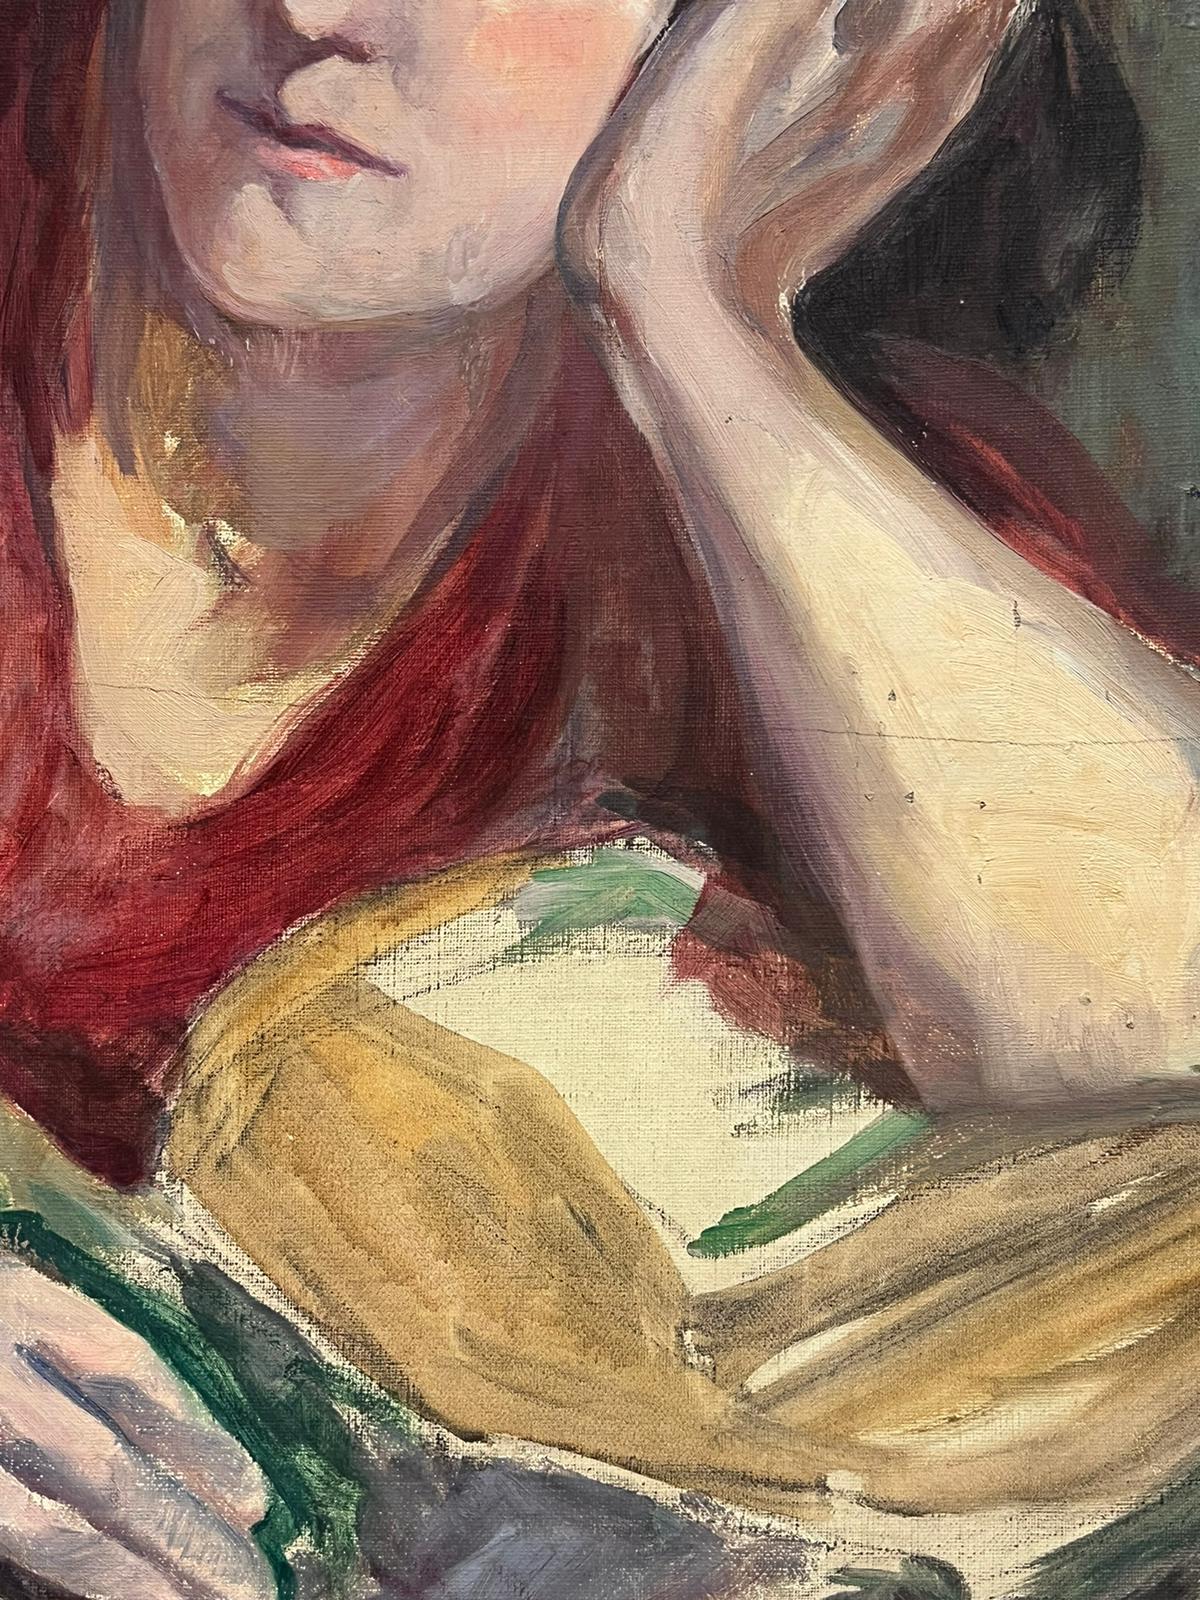 Portrait of a Woman
by Louise Alix (French, 1888-1980) *see notes below
oil painting on canvas unframed
measures: 20 inches high by 24 inches wide
condition: overall very good and sound, a few scuffs and marks to the surface and wear to the four